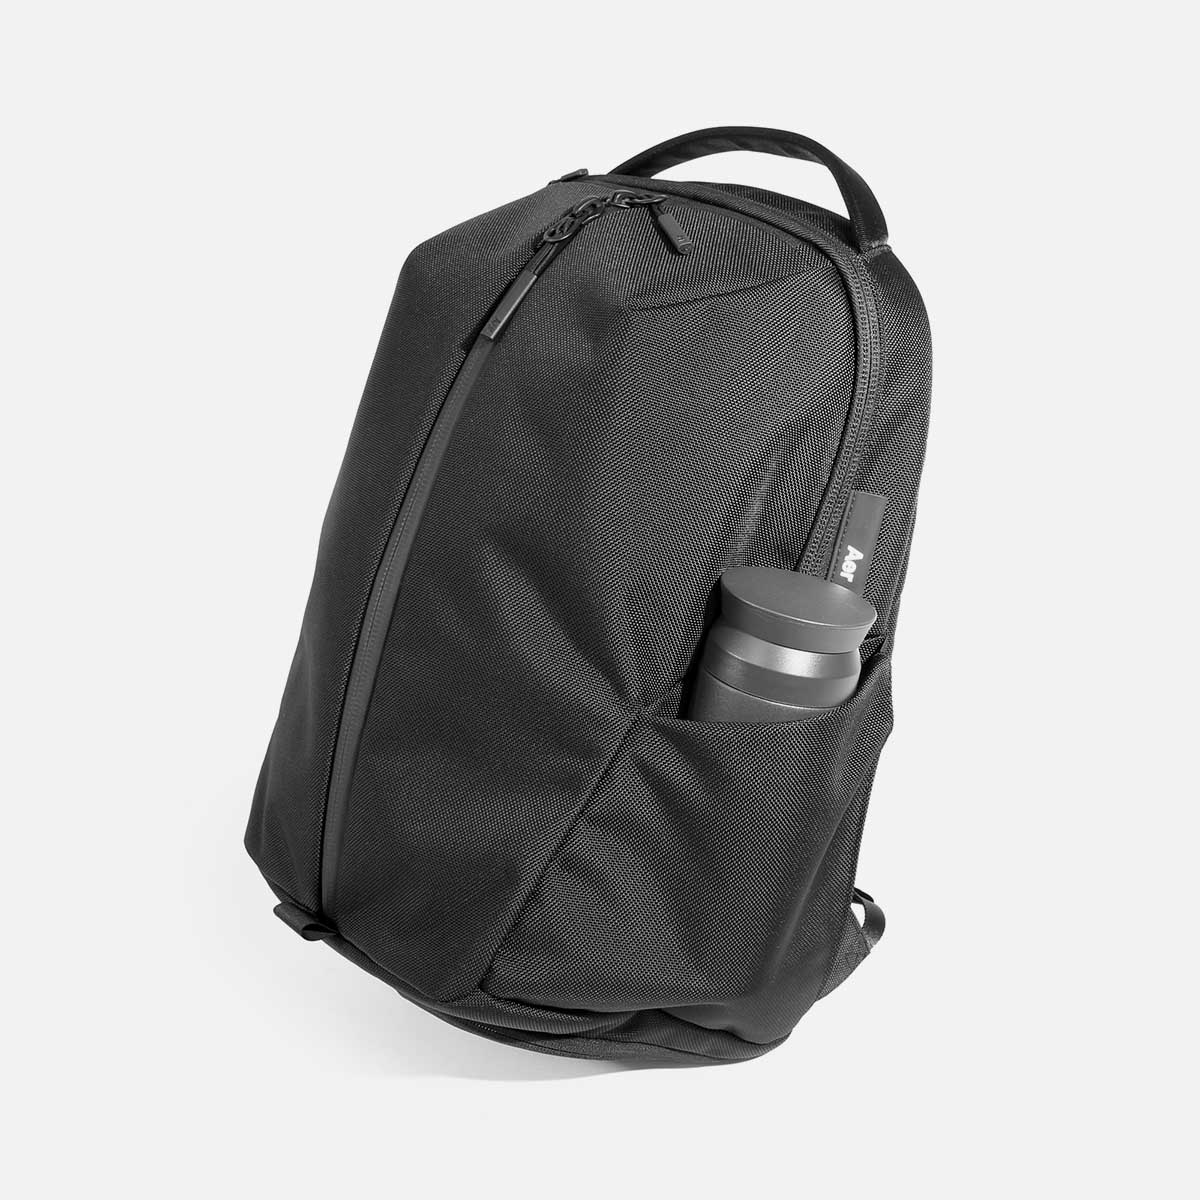 Win 3 Fitpack 3 Backpack Giveaway